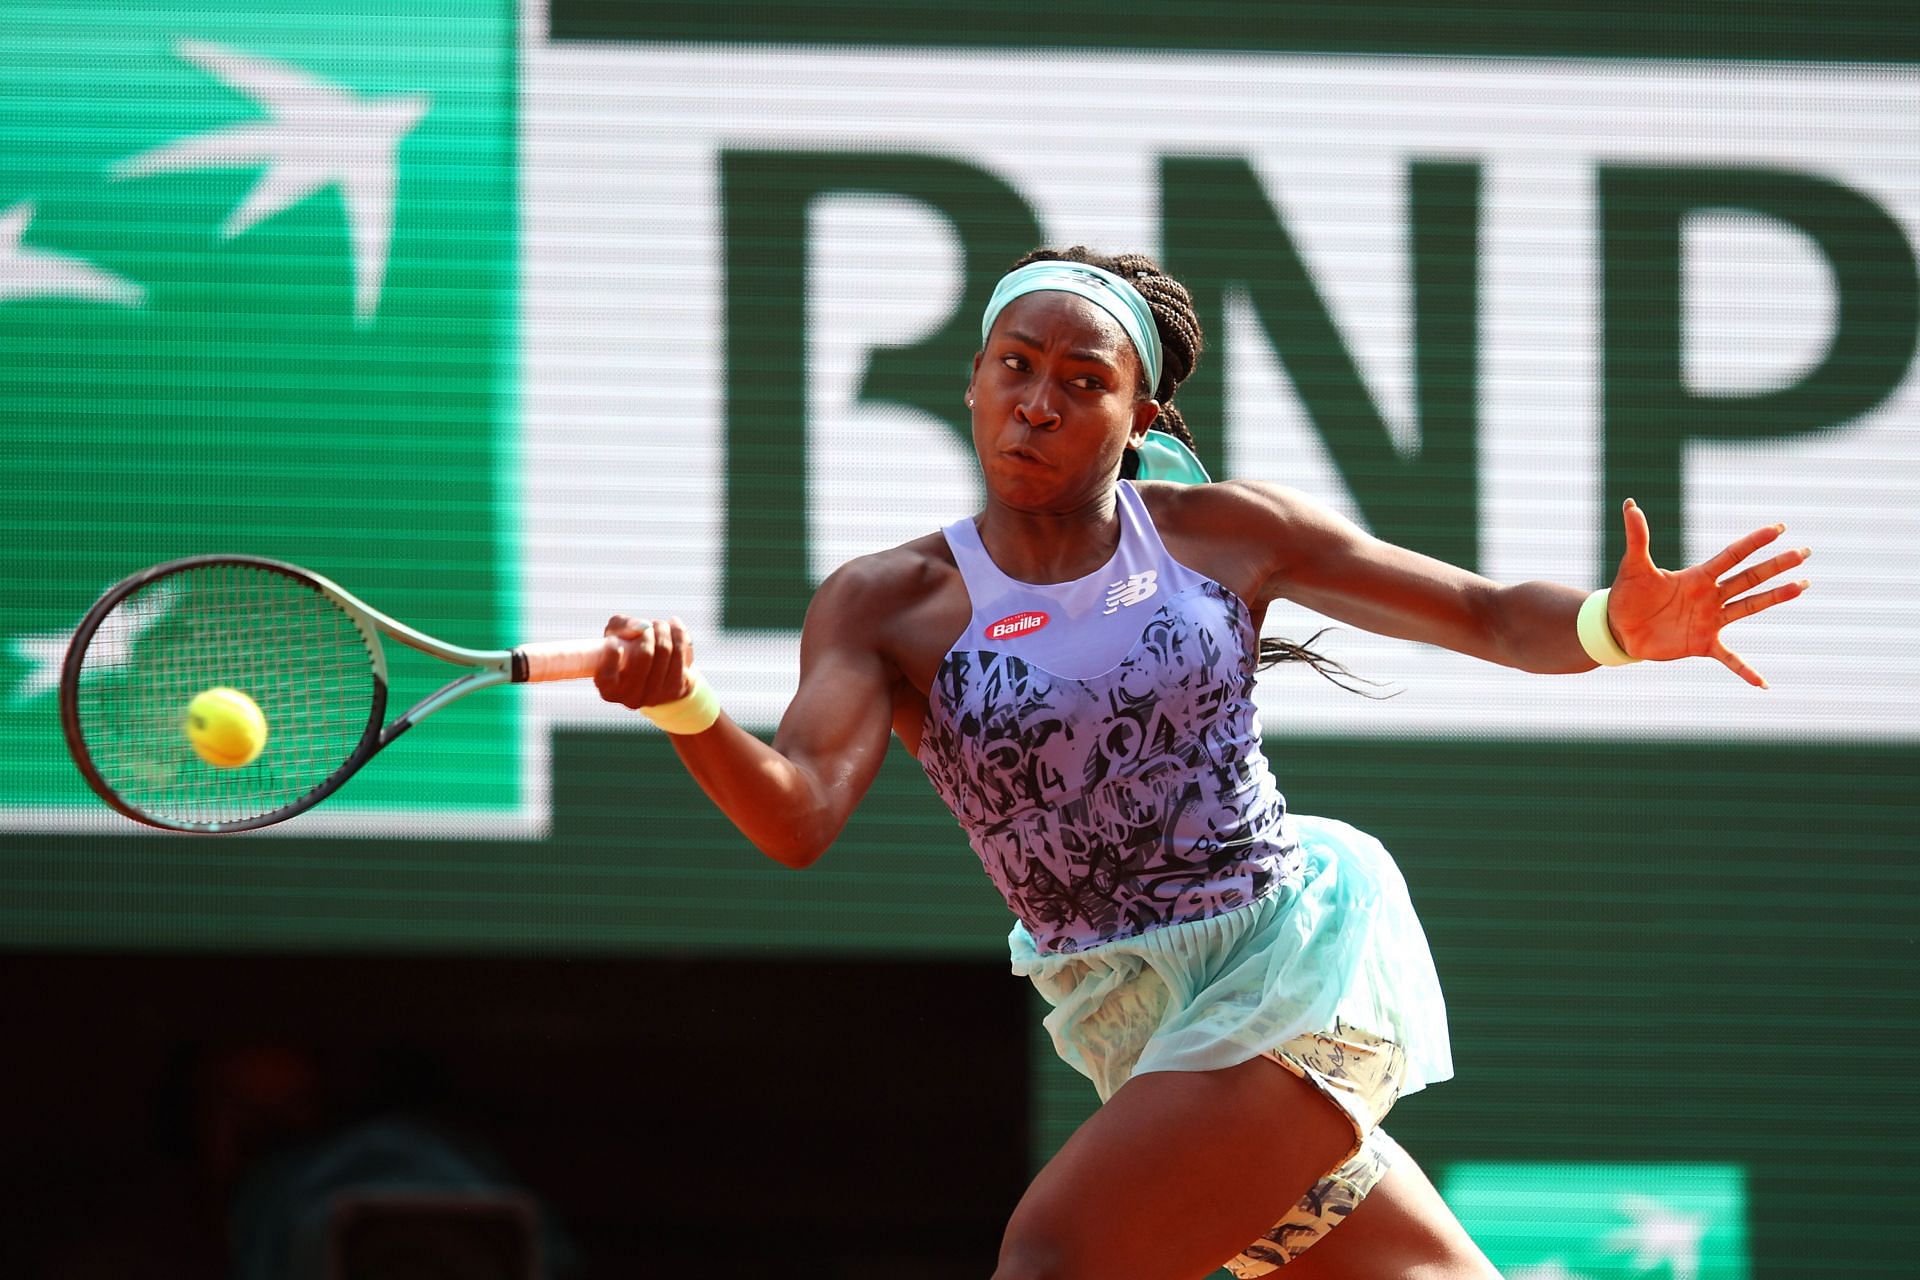 Coco Gauff defeated Martina Trevisan 6-3, 6-1 in the French Open semifinal on Thursday